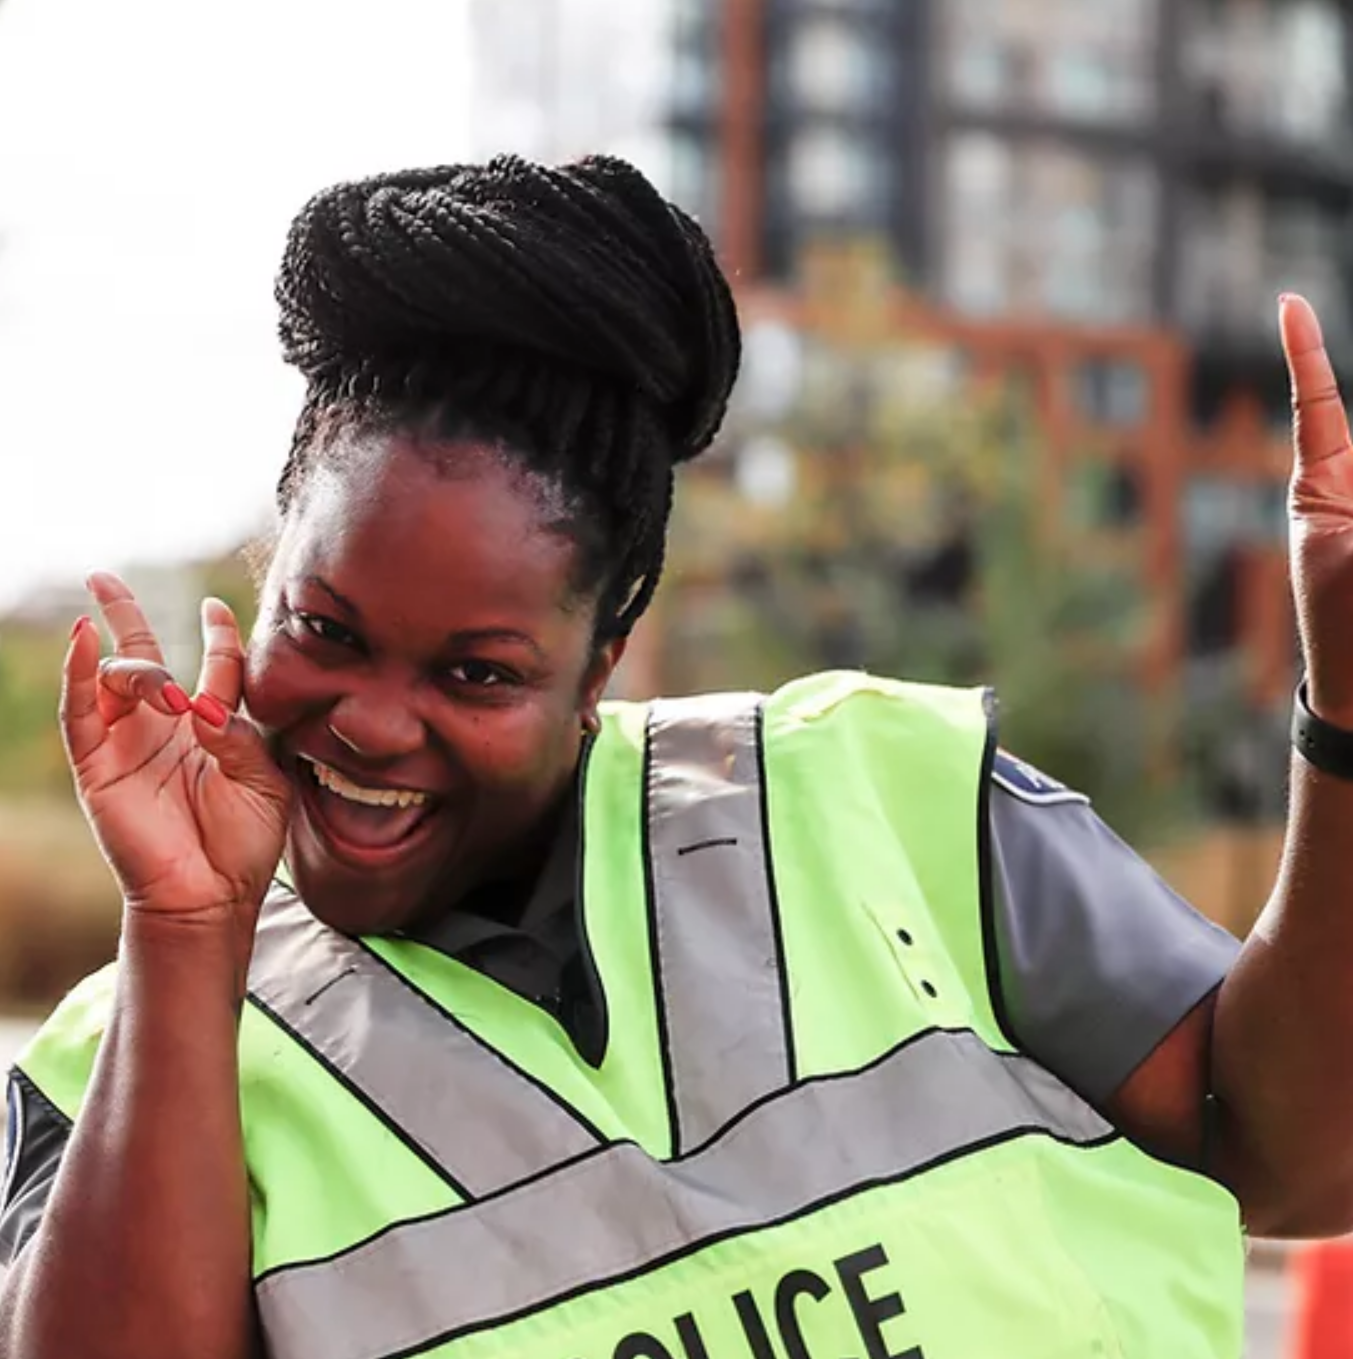 Shakita Warren wearing a high visibility vest and smiling, holding up both hands in 'peace signs'